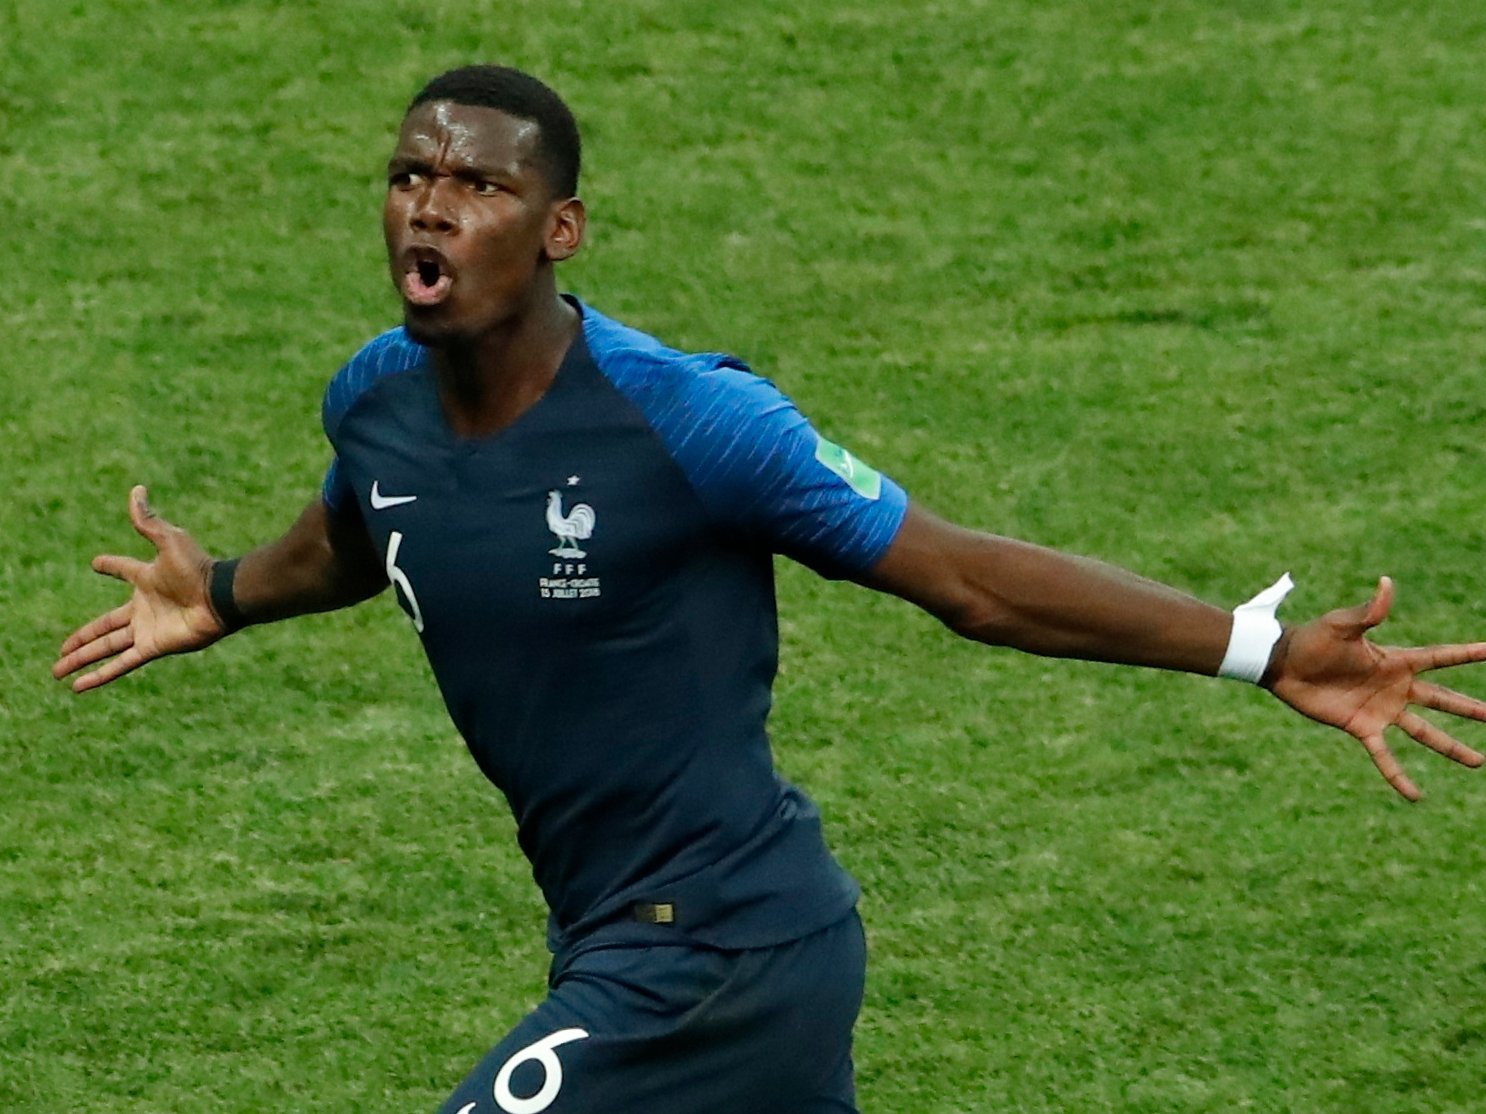 World Cup final 2018 player ratings: France vs Croatia - Paul Pogba dazzles in the biggest game of his career | The Independent